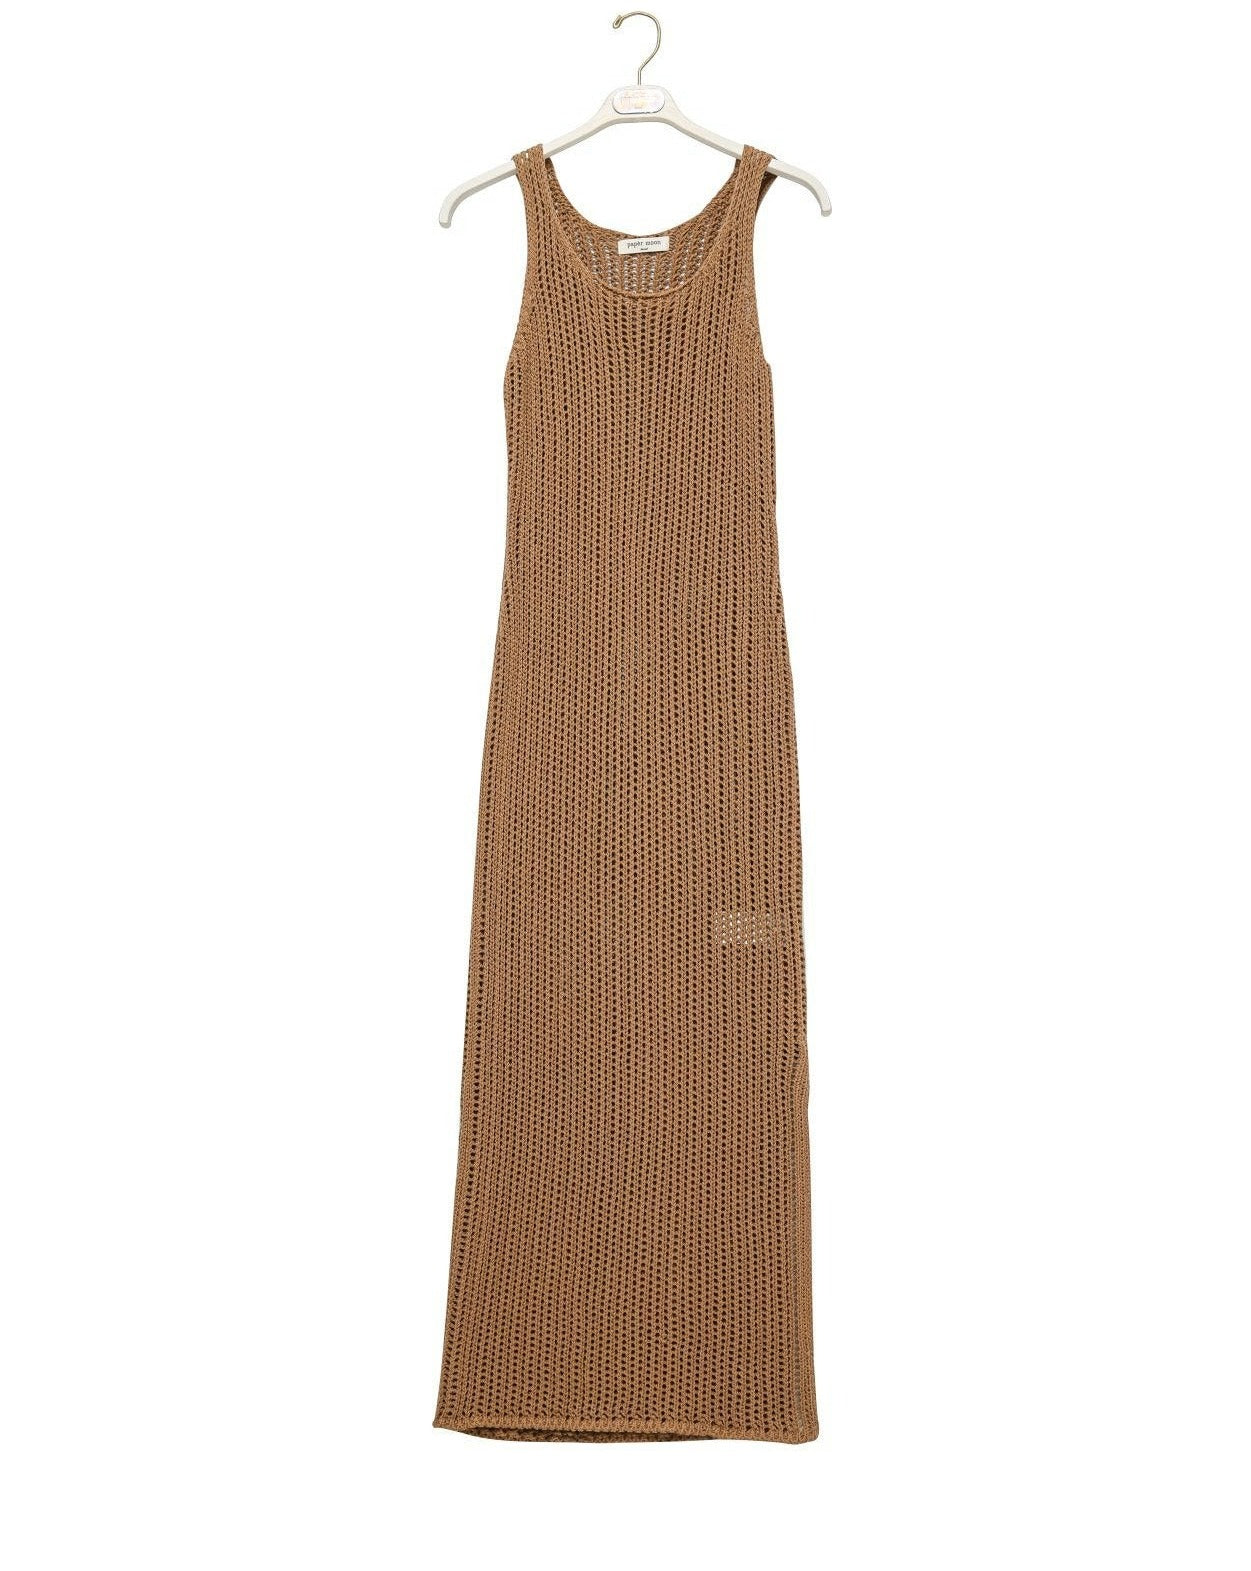 [PAPERMOON] SS / Organic Cotton One Slit Maxi Cover Up Knit Dress